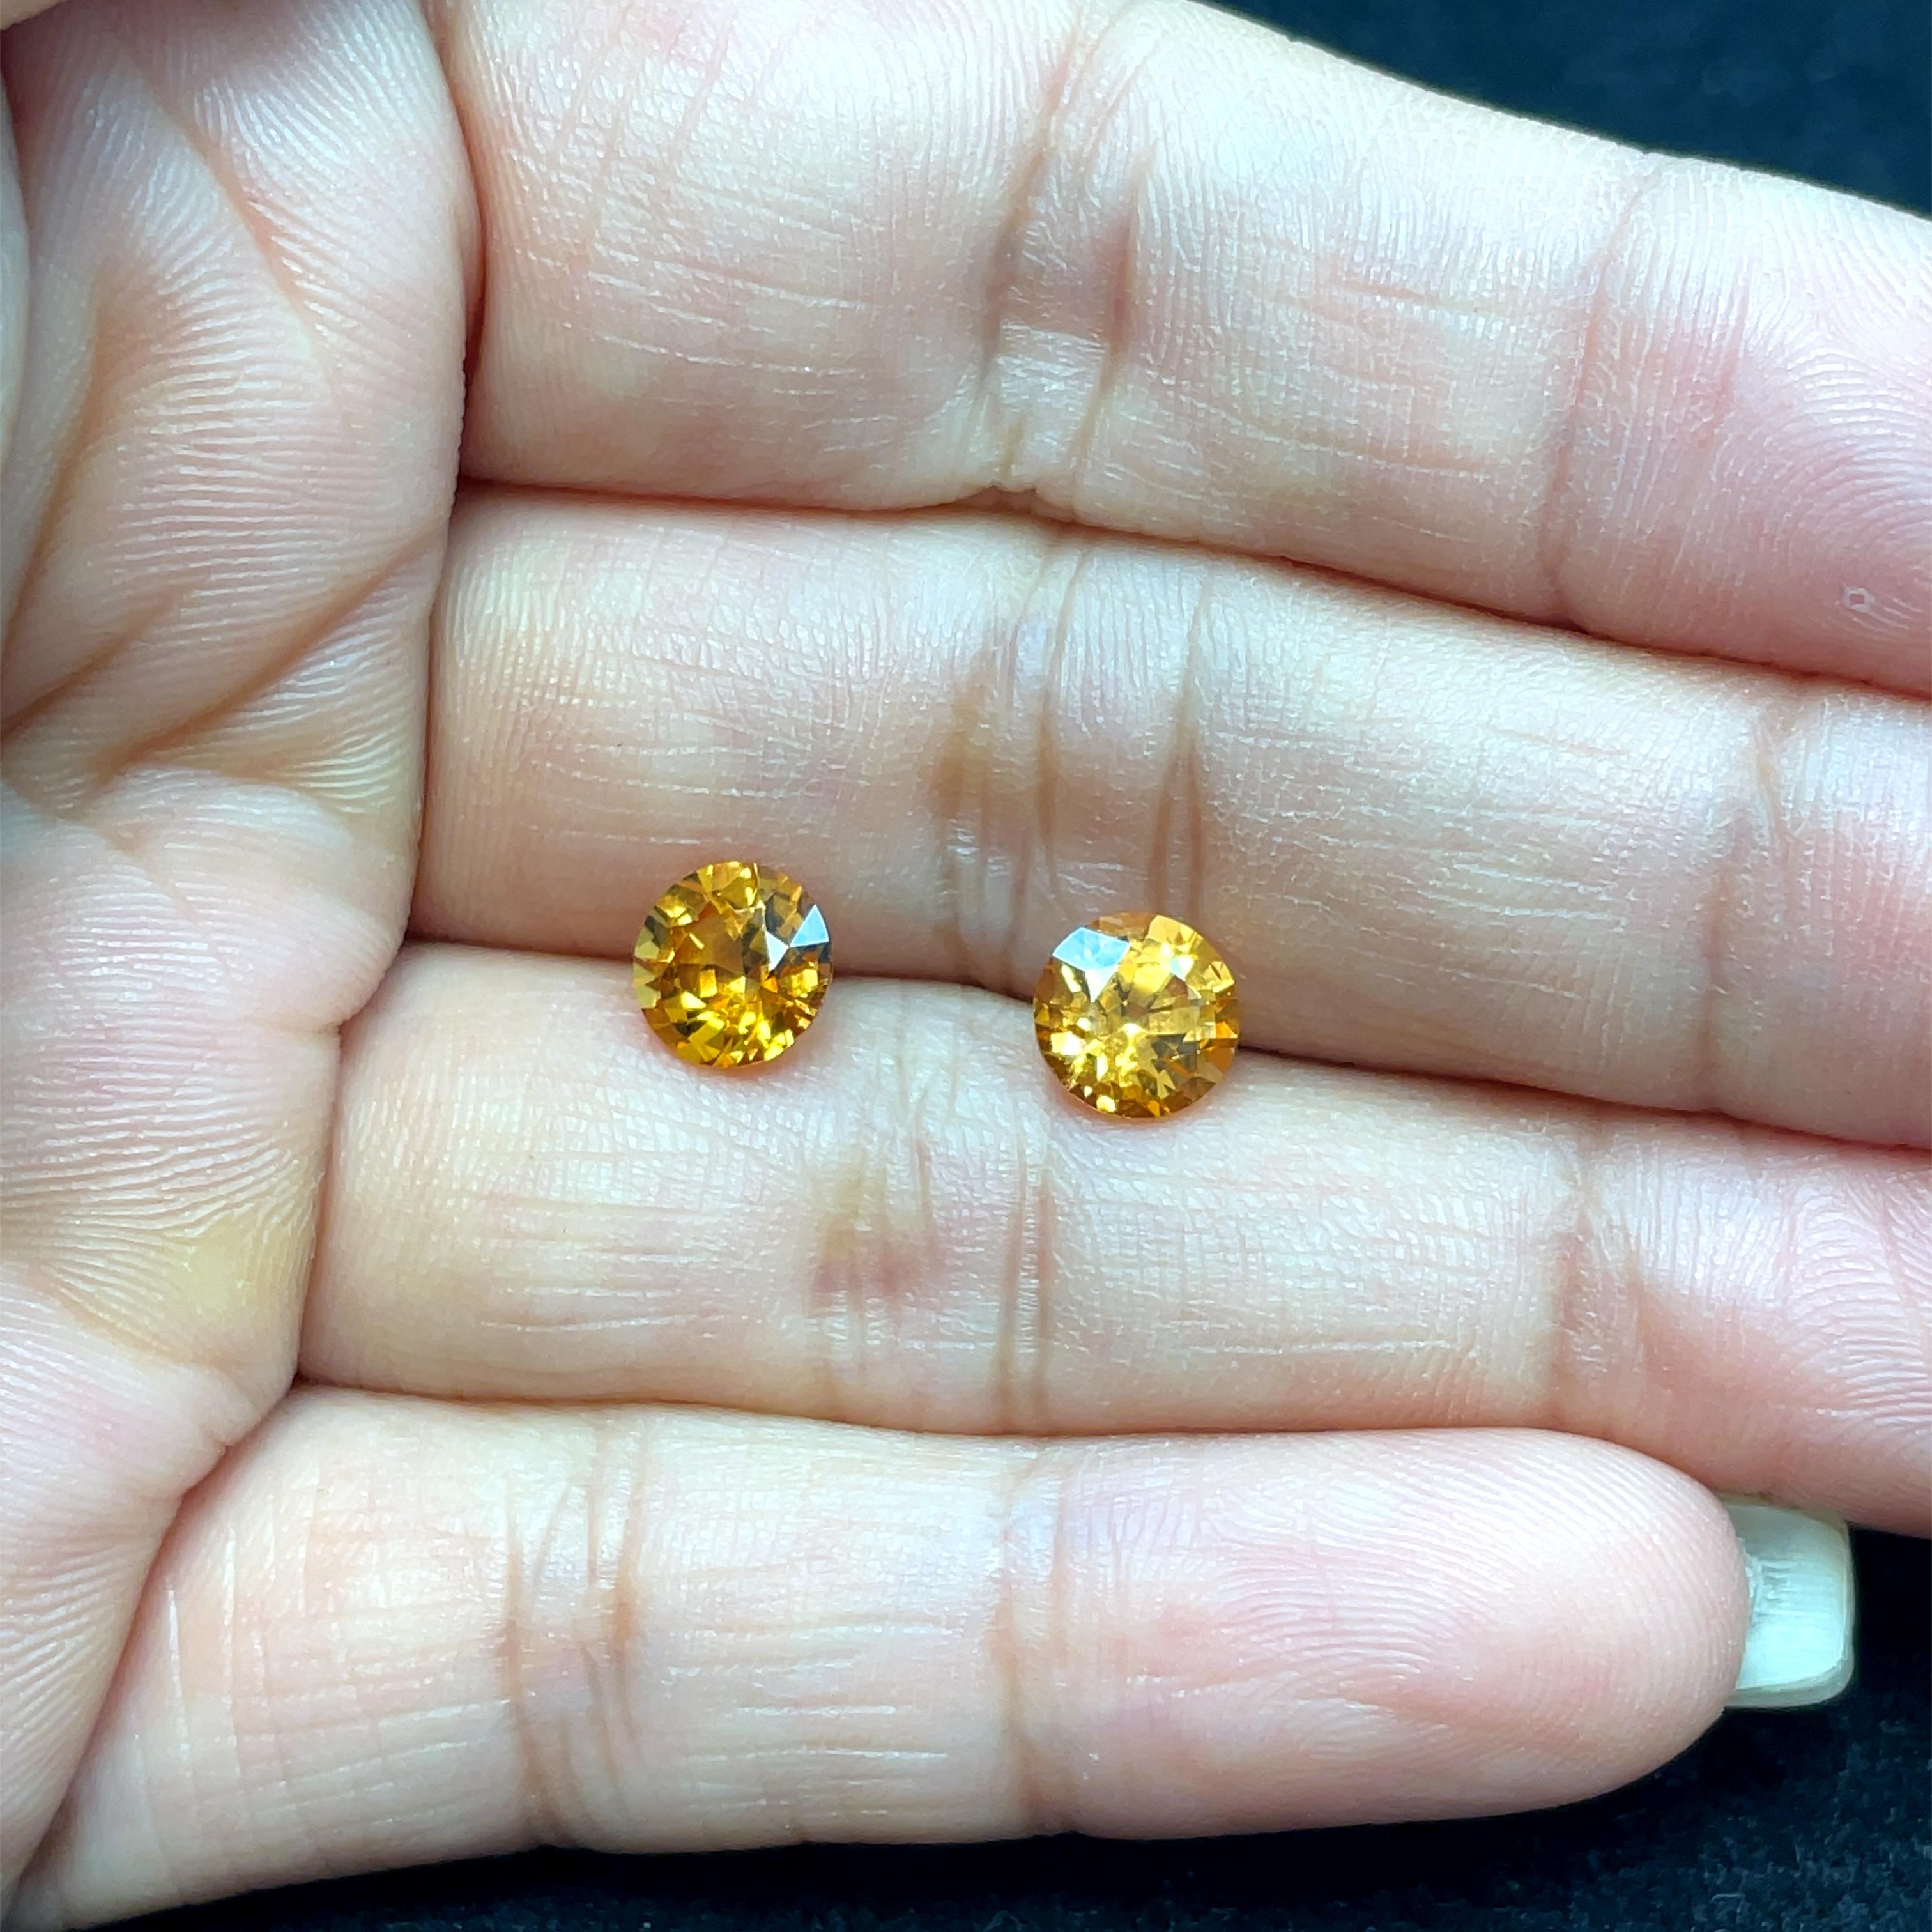 The striking orange color of these beautiful stones is sure to catch attention and make an impression. 

With one gem weighing 1.63 carats and measuring 6.81 x 6.78 x 4.51 mm, and the other weighing 1.65 carats and measuring 6.80 x 6.83 x 4.62 mm,